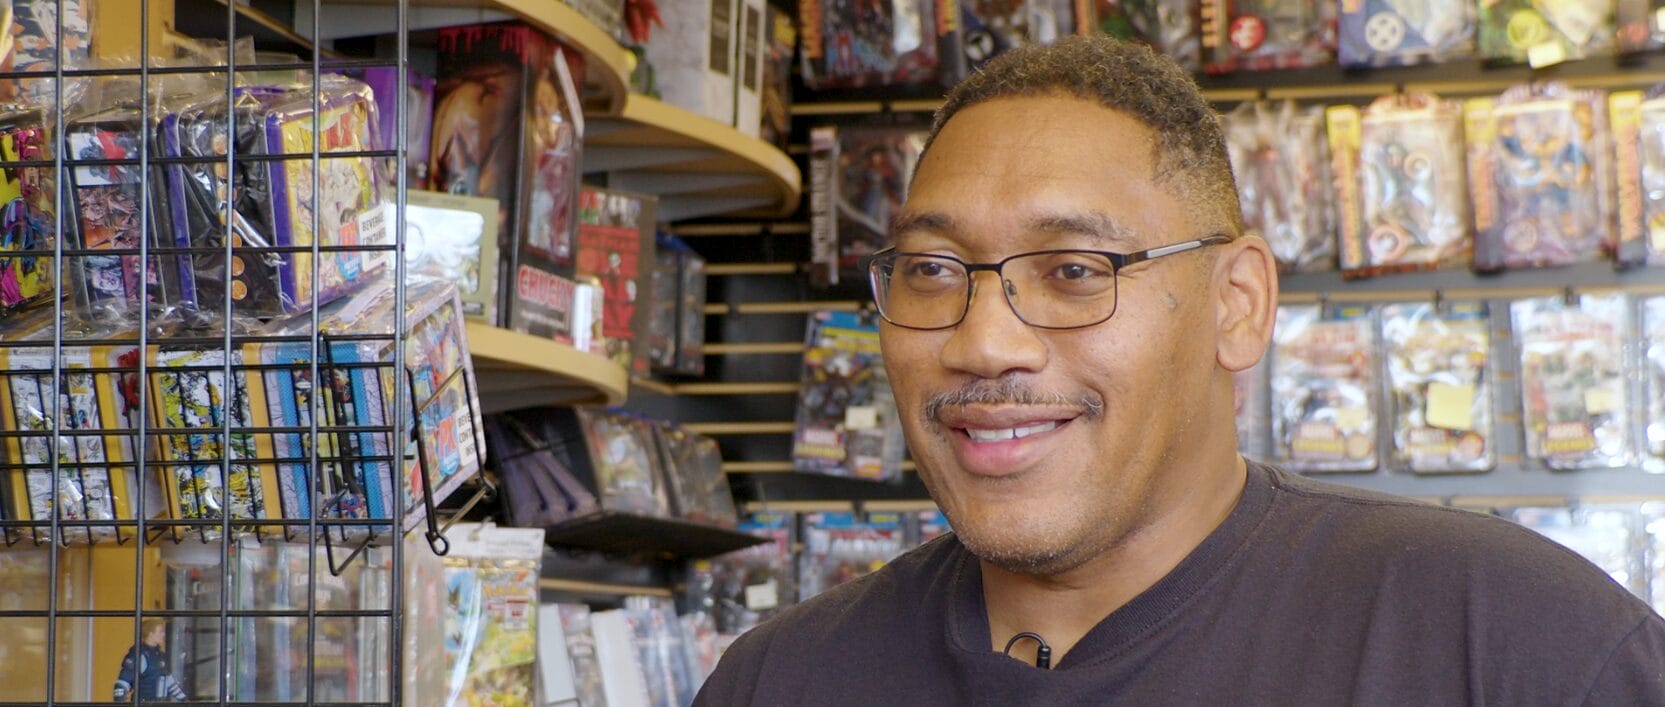 Black-owned comic book store: A passion project for an assistant principal – Indianapolis News | Indiana Weather | Indiana Traffic